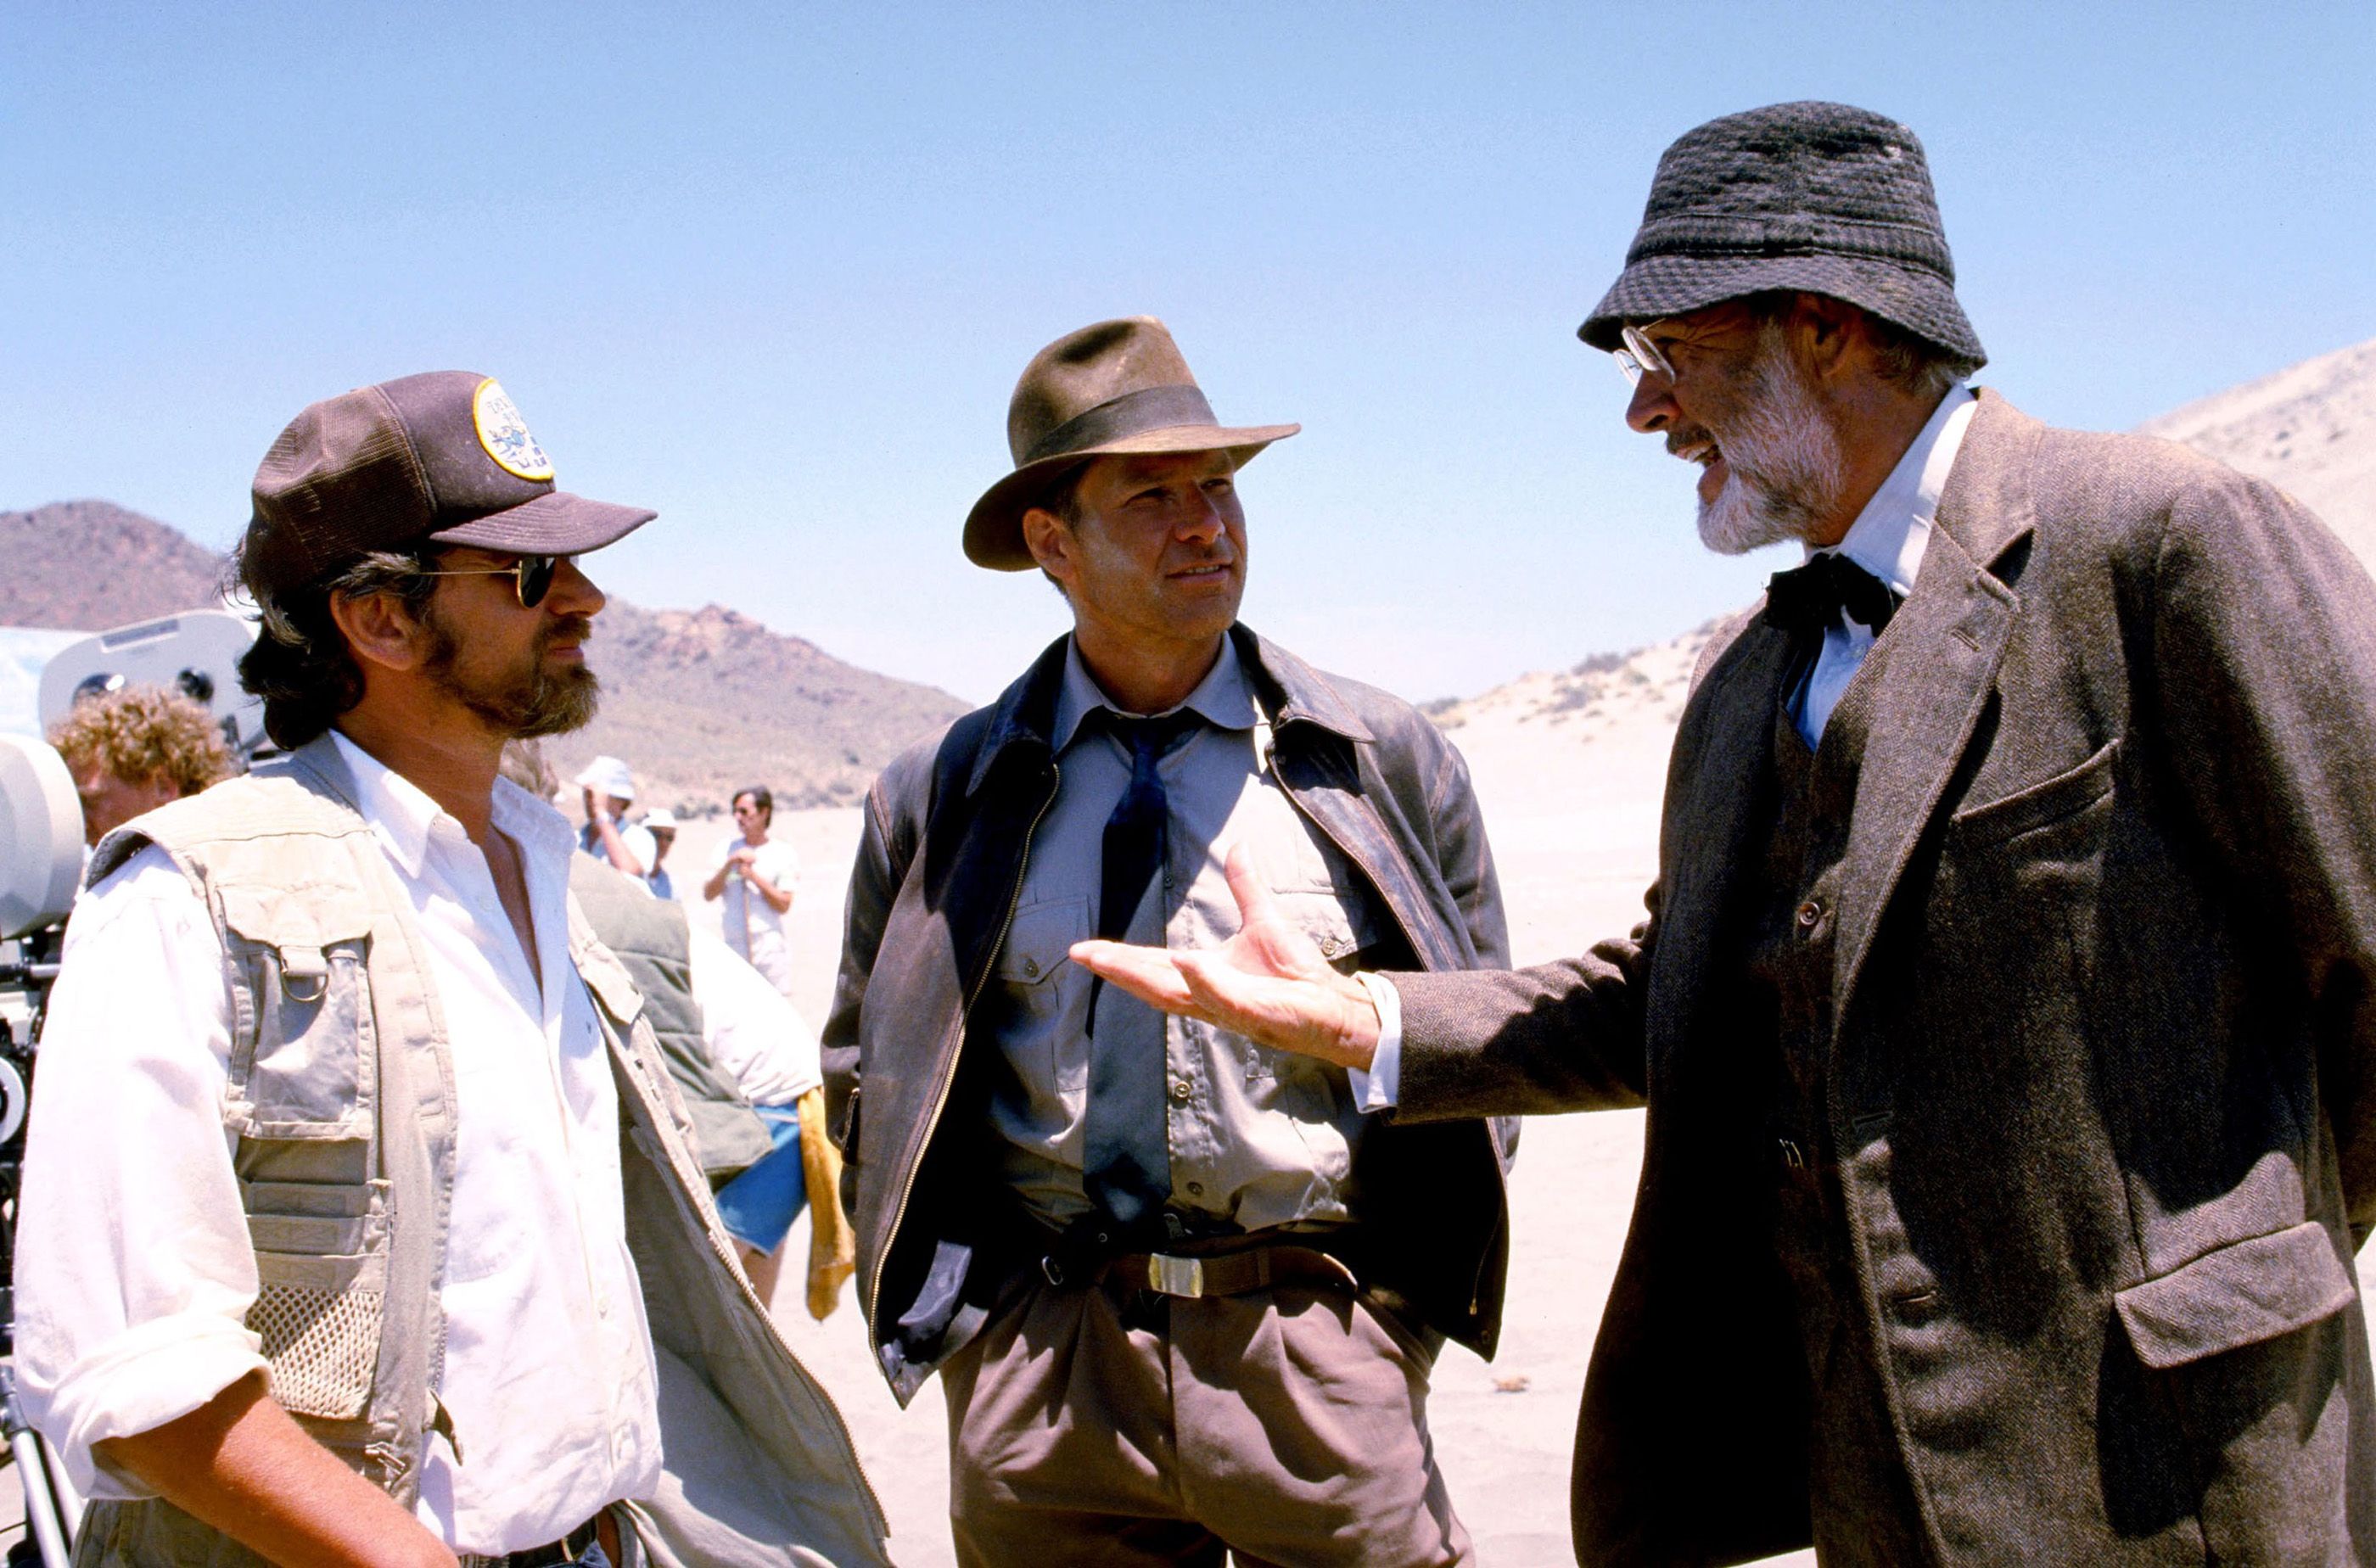 Behind The Scenes Photo From Indiana Jones' Raiders Of The Lost Ark